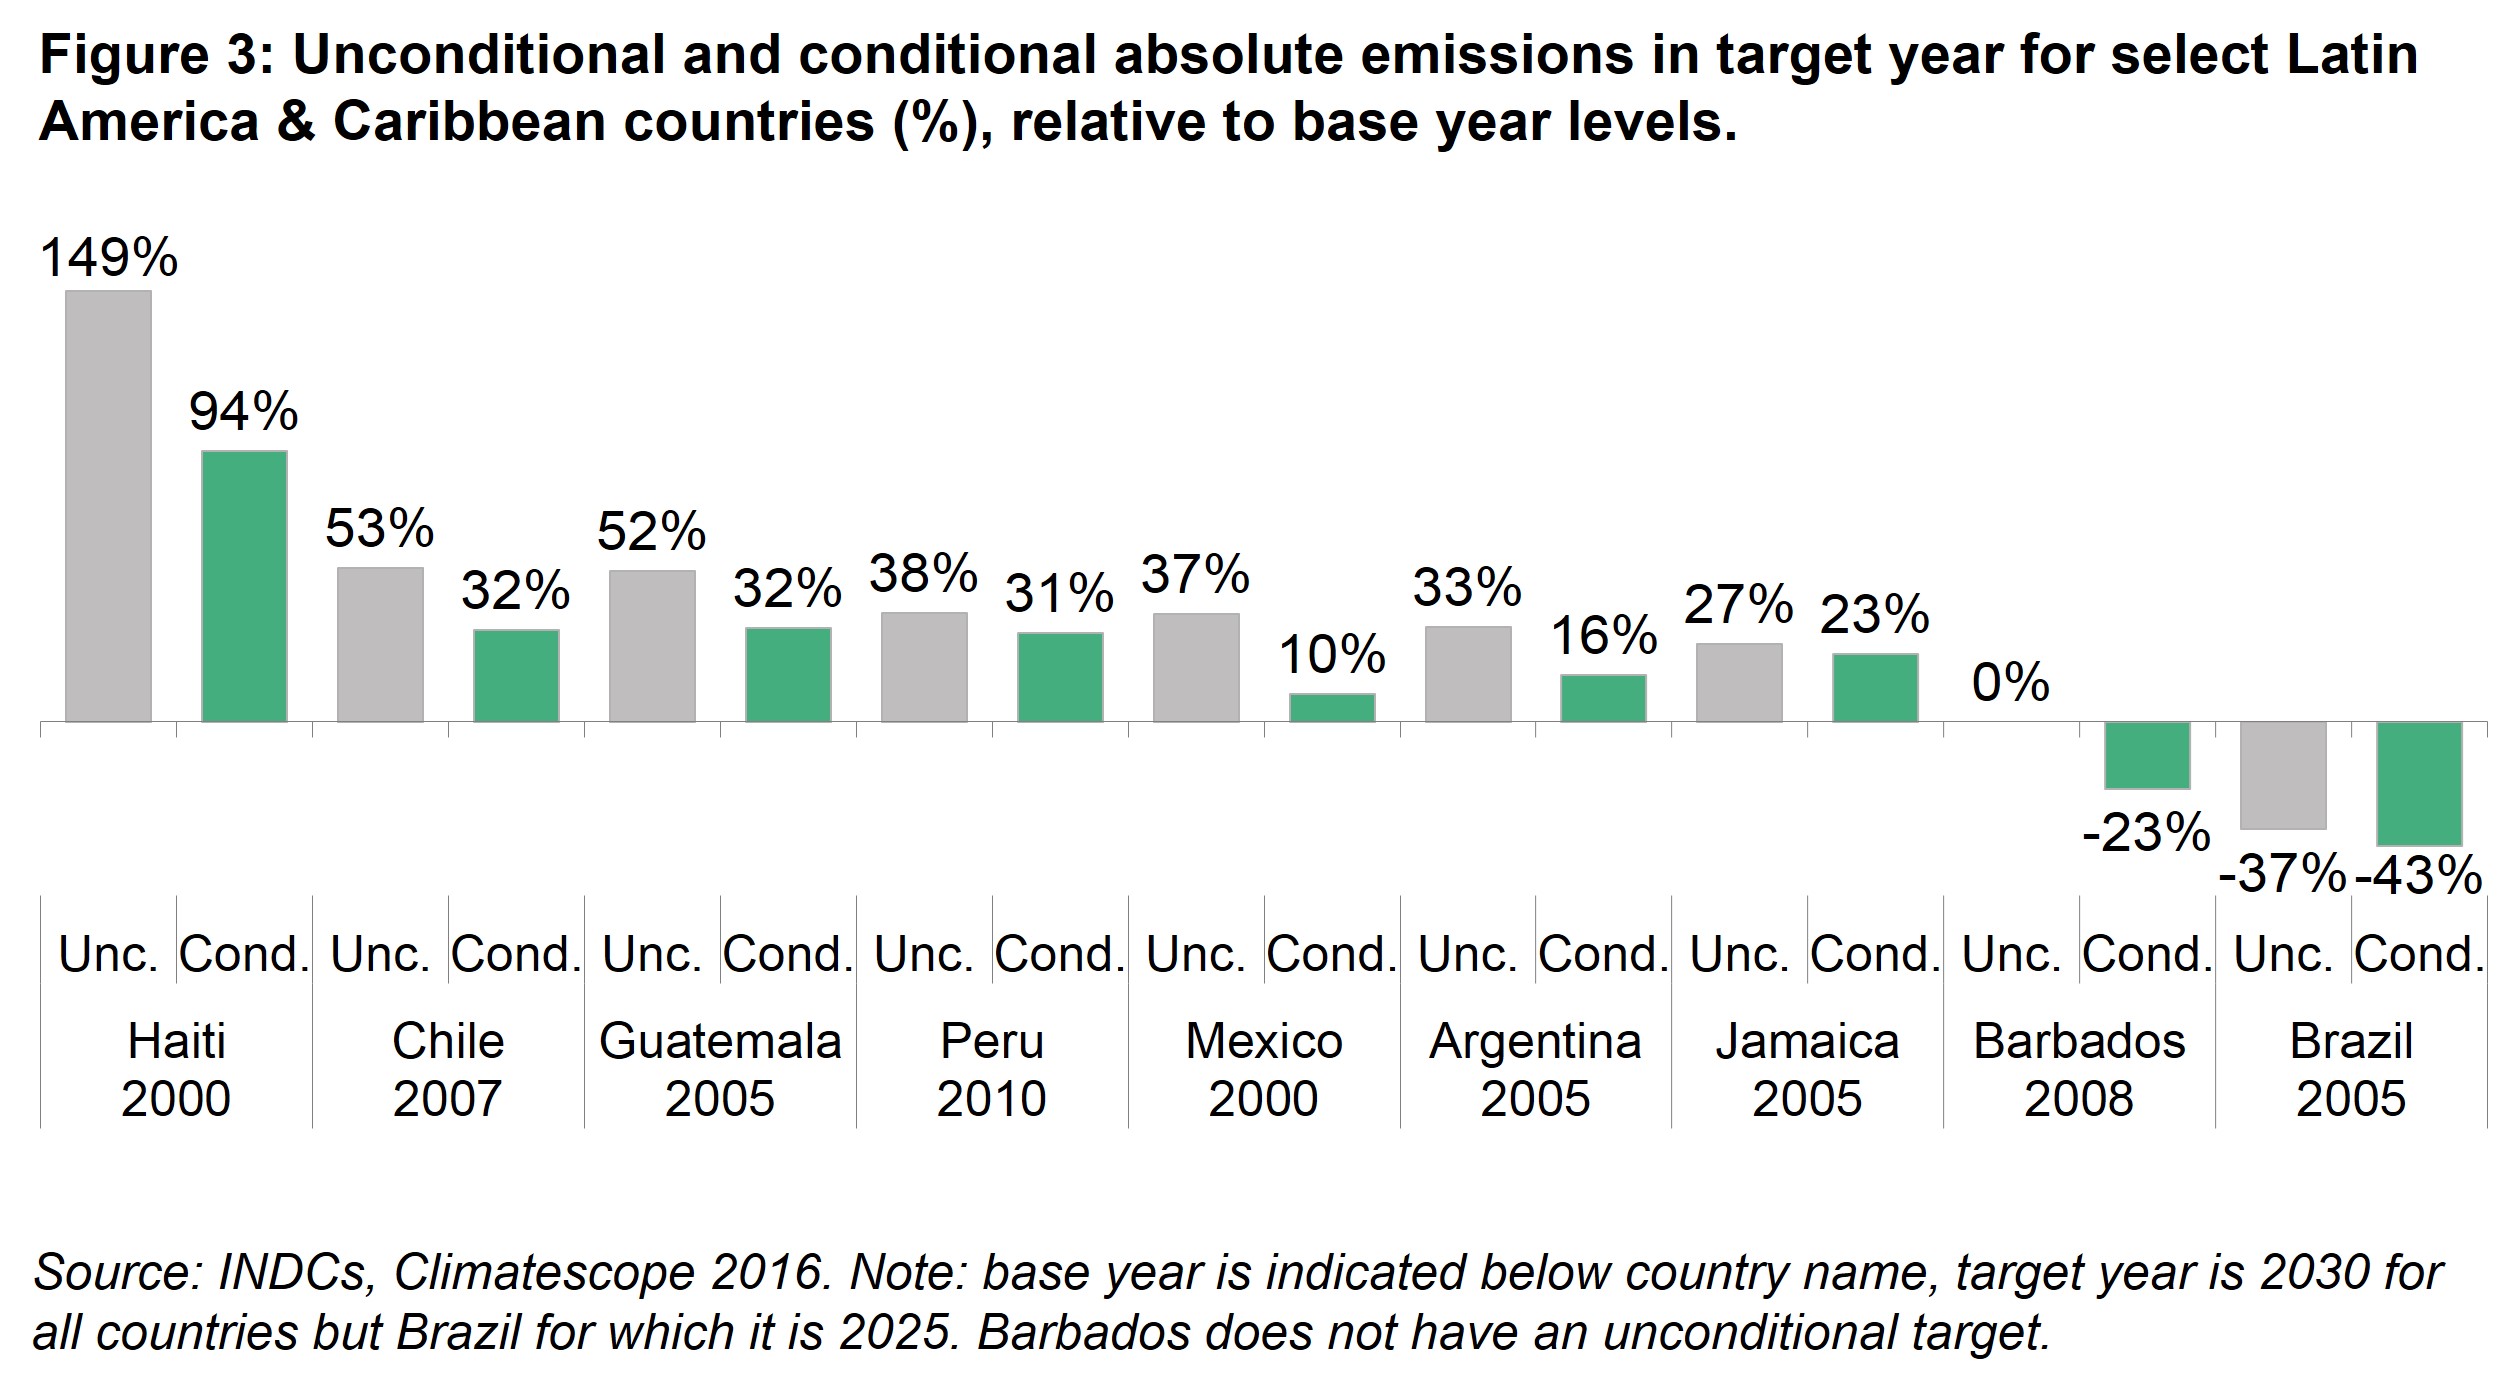 LAC Fig 3 - Unconditional and conditional absolute emissions in target year for select Latin America & Caribbean countries, relative to base year levels